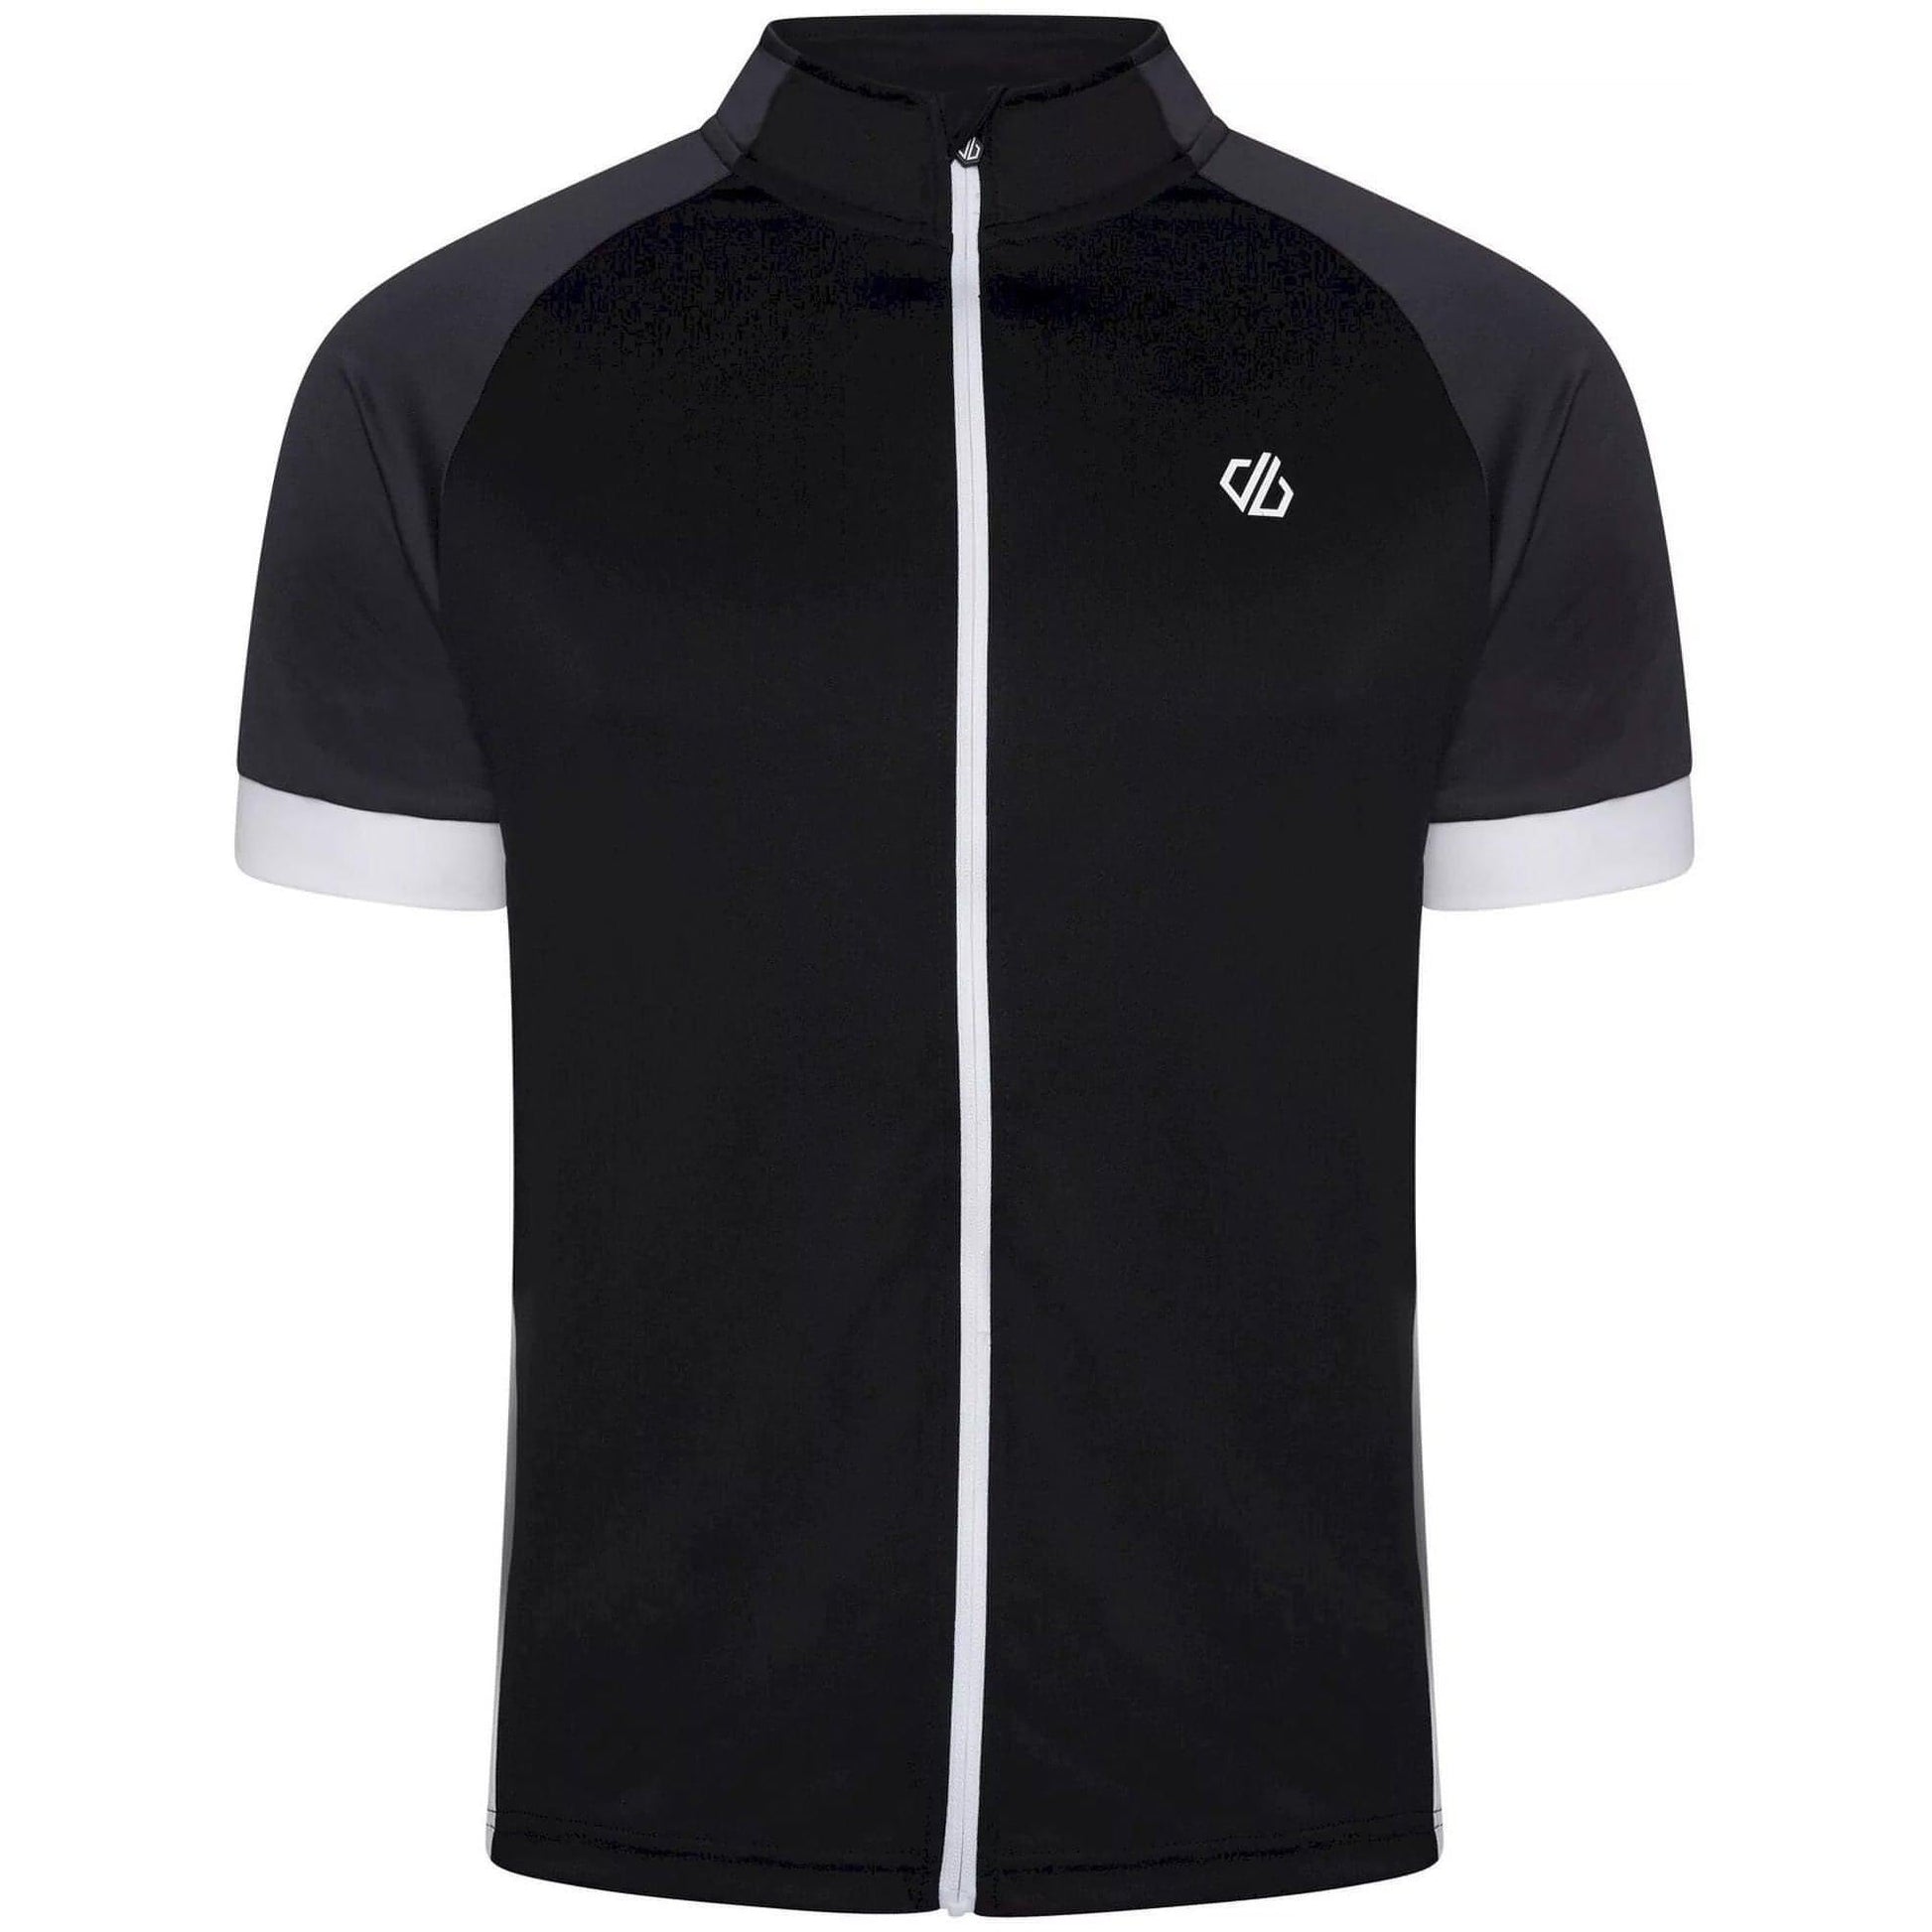 Dare2B Protaction Short Sleeve Jersey Dmt568  Front - Front View